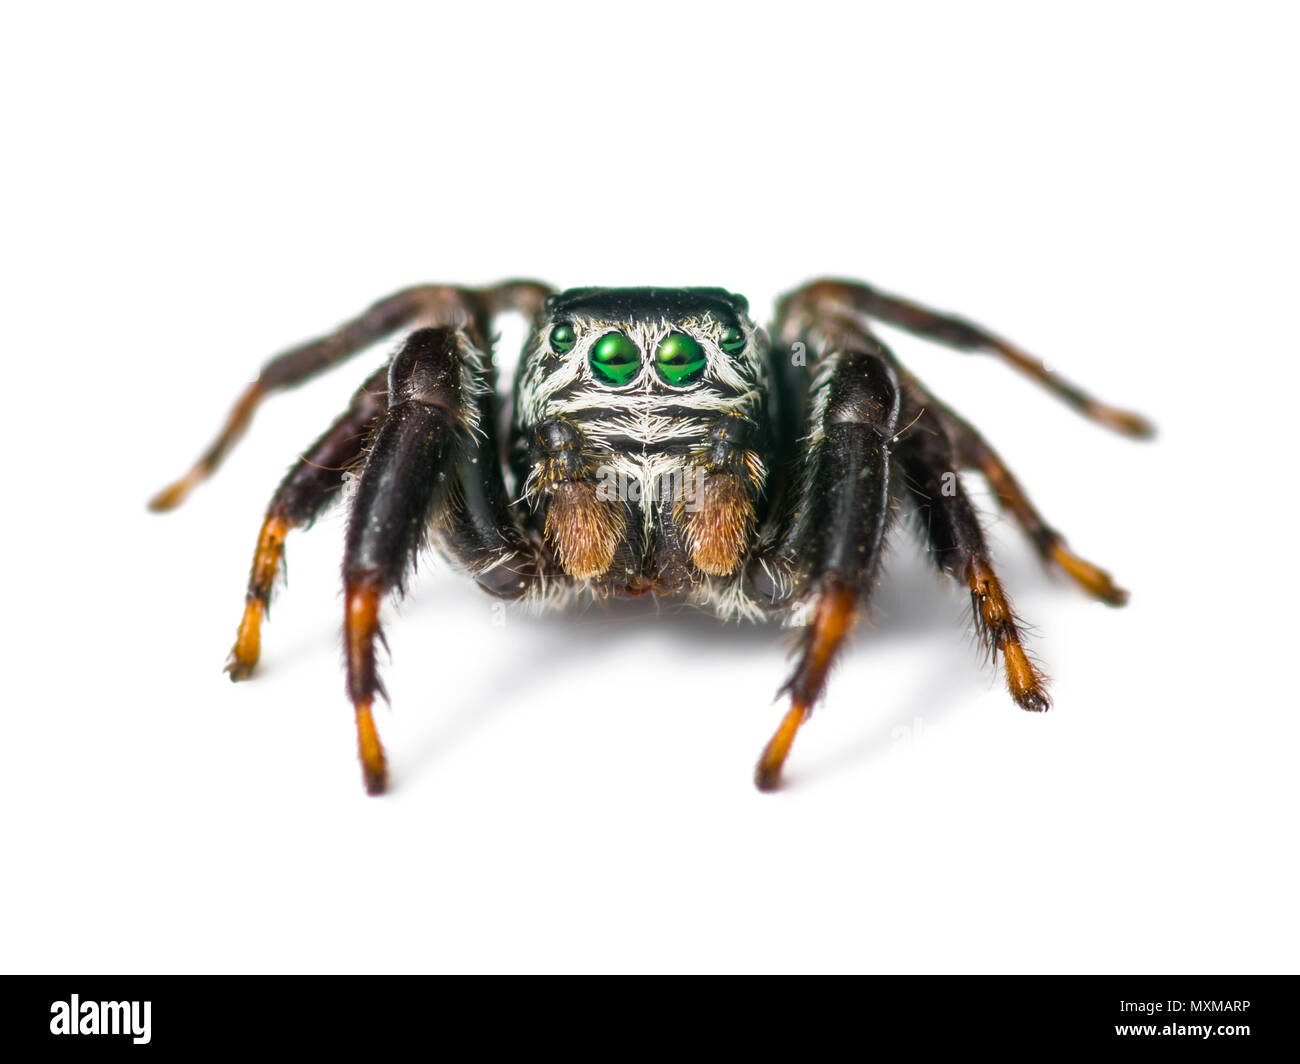 Jumping Spider Arachnid Insect Isolated on White Stock Photo